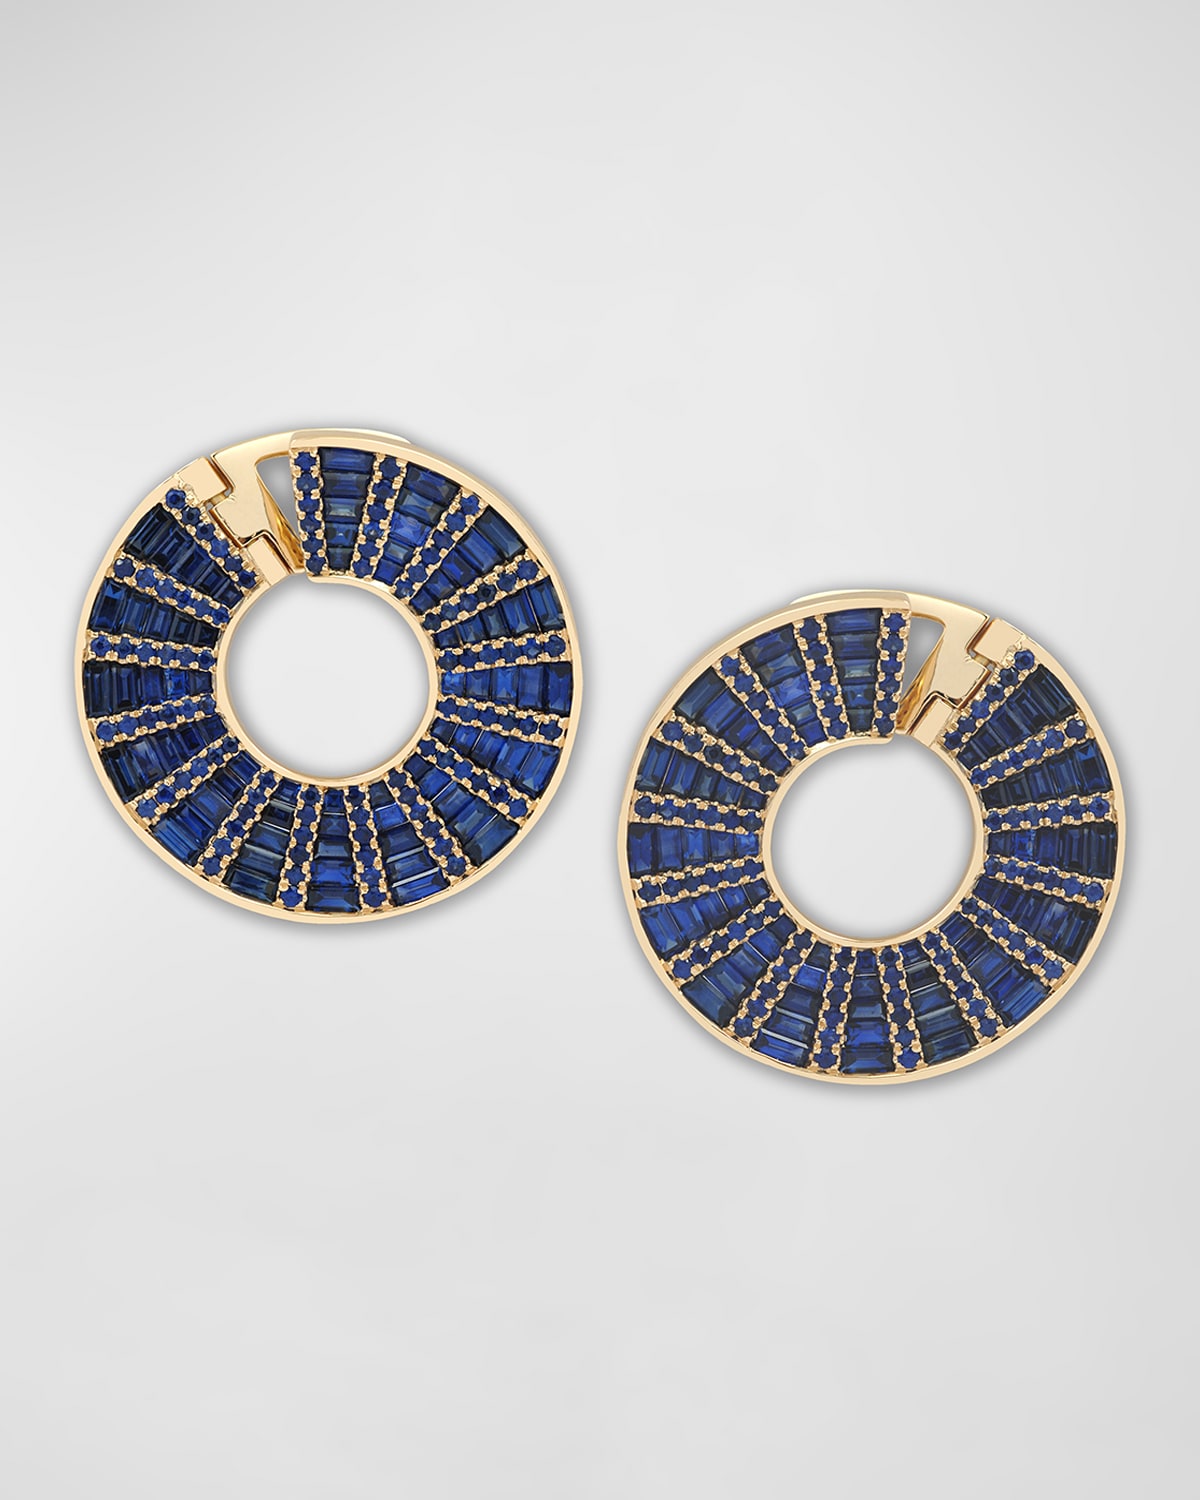 18K Gold and Sapphire Earrings